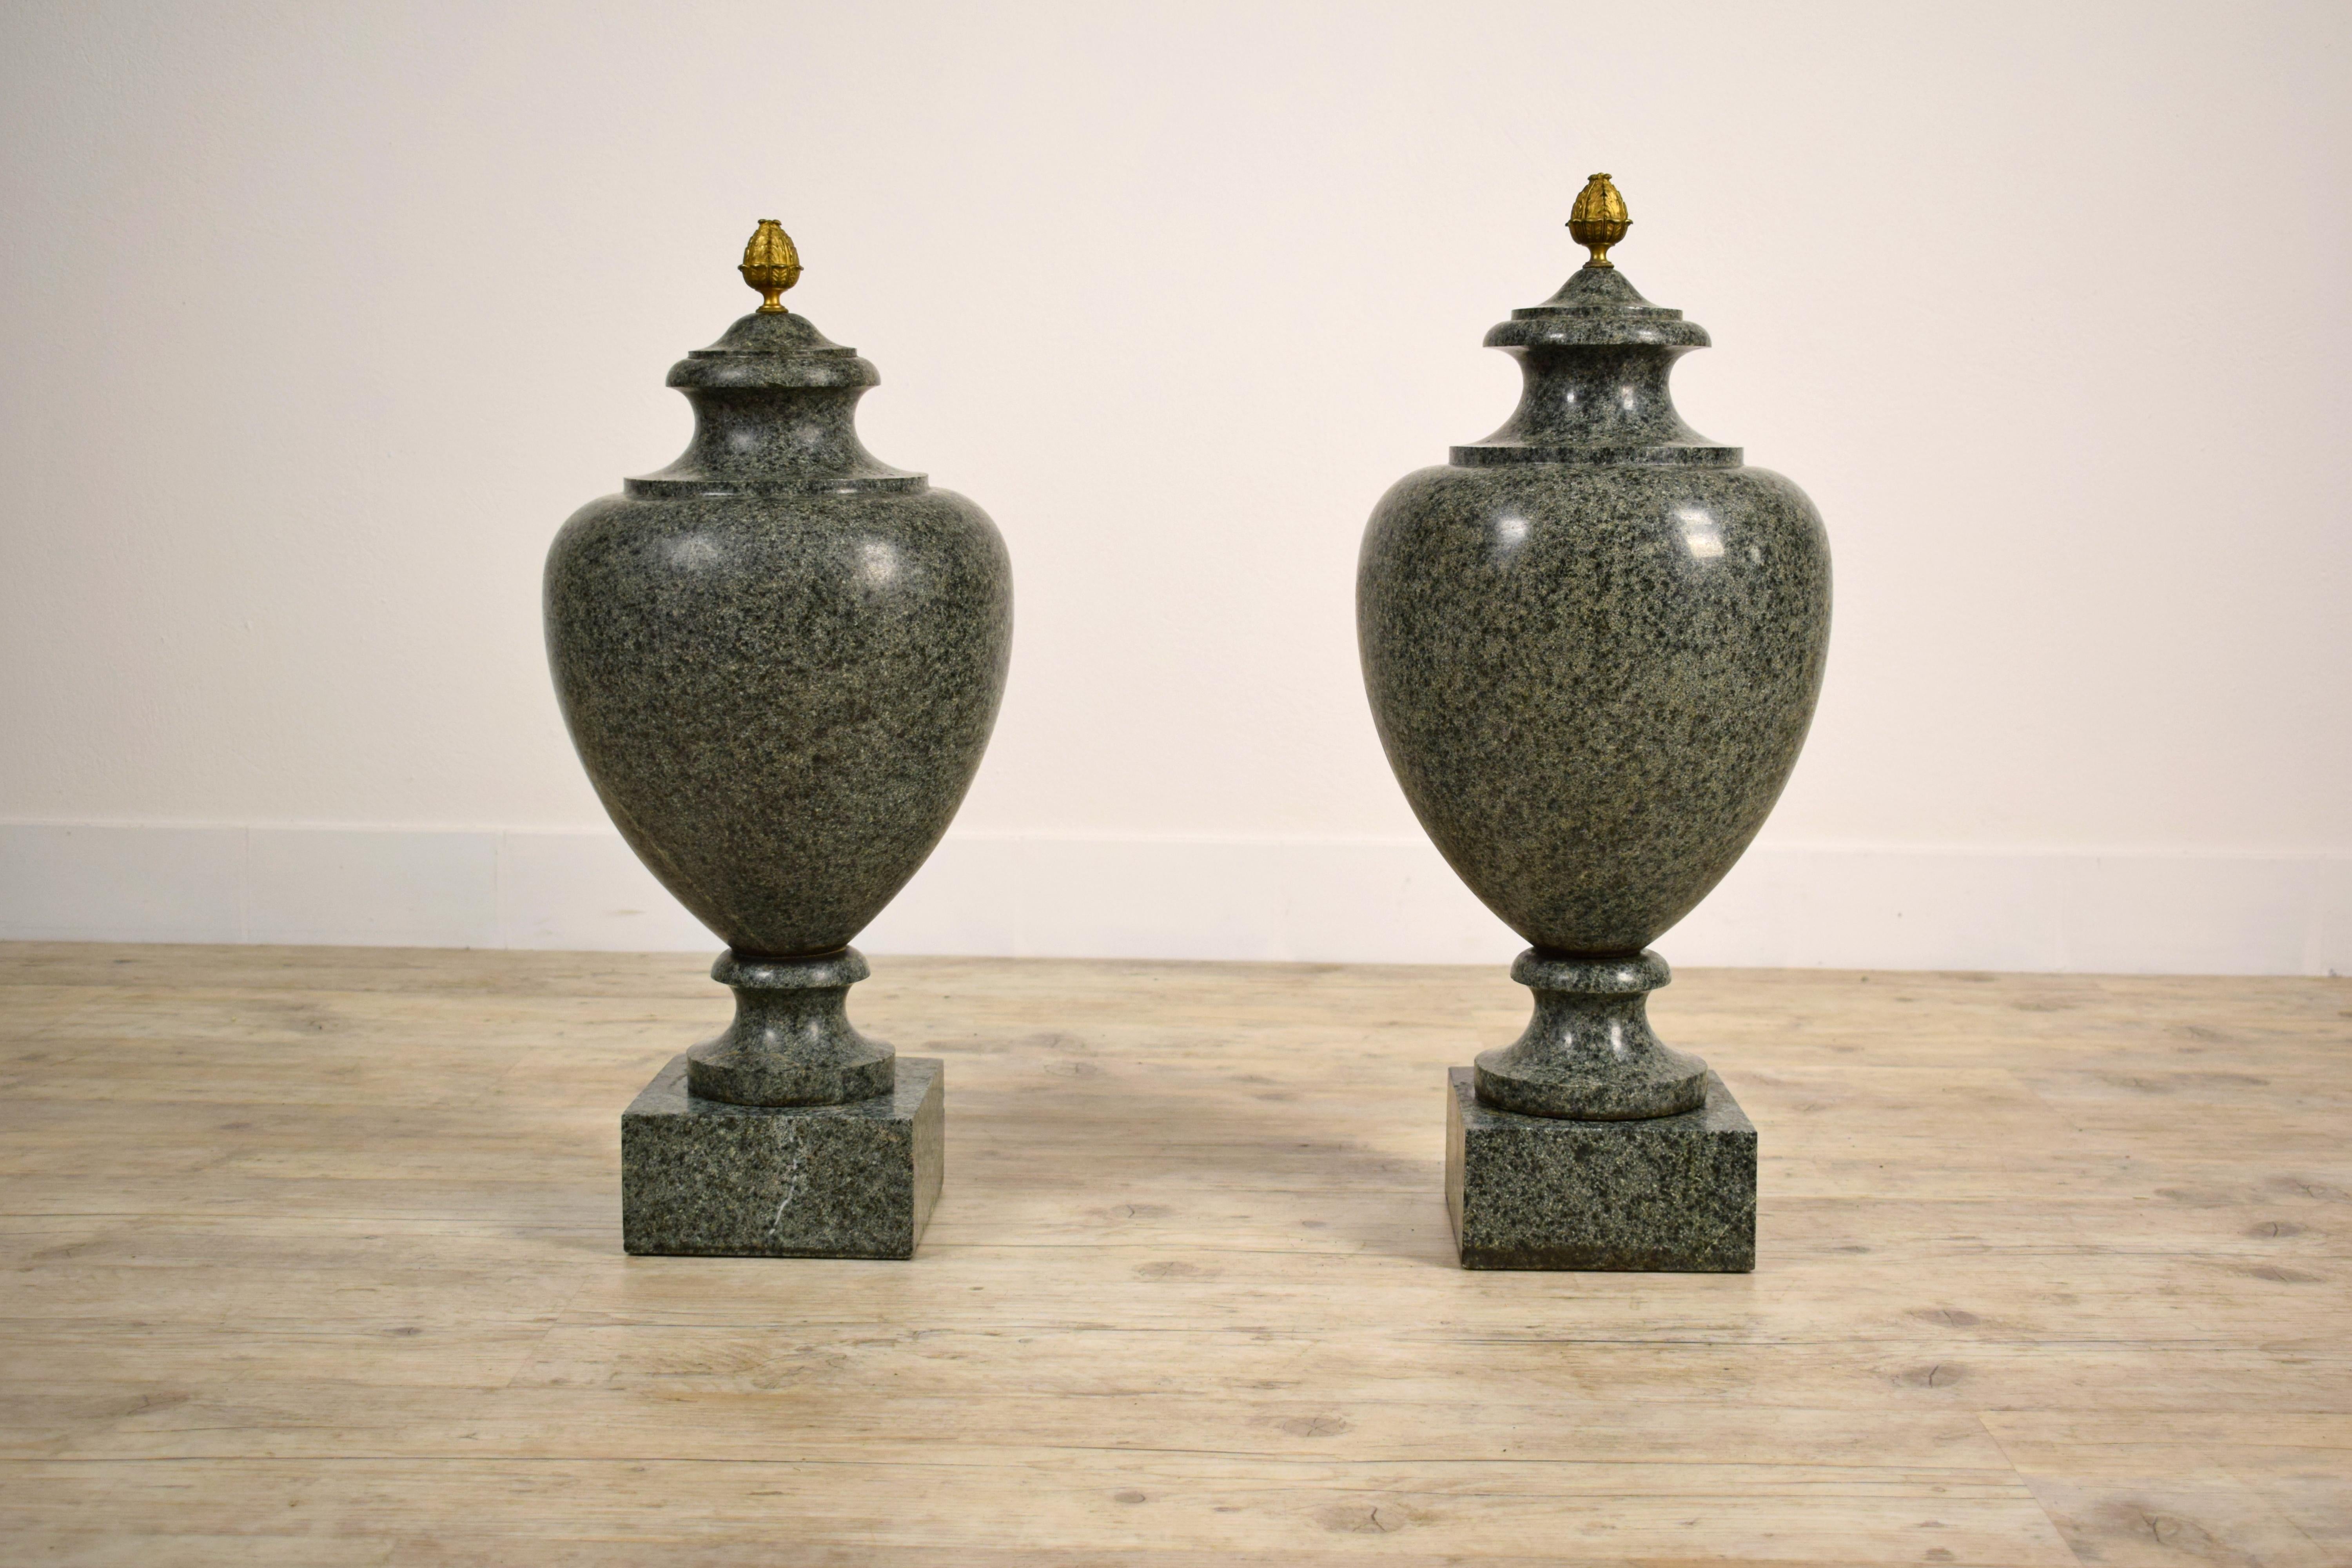 19th century, pair of Louis XVI style green granite vases
Measures: the vases have different sizes. Measures: Height 65 cm x diameter 30 cm; height 70 cm x diameter 30 cm

This elegant pair of vases, made of green granite in the nineteenth